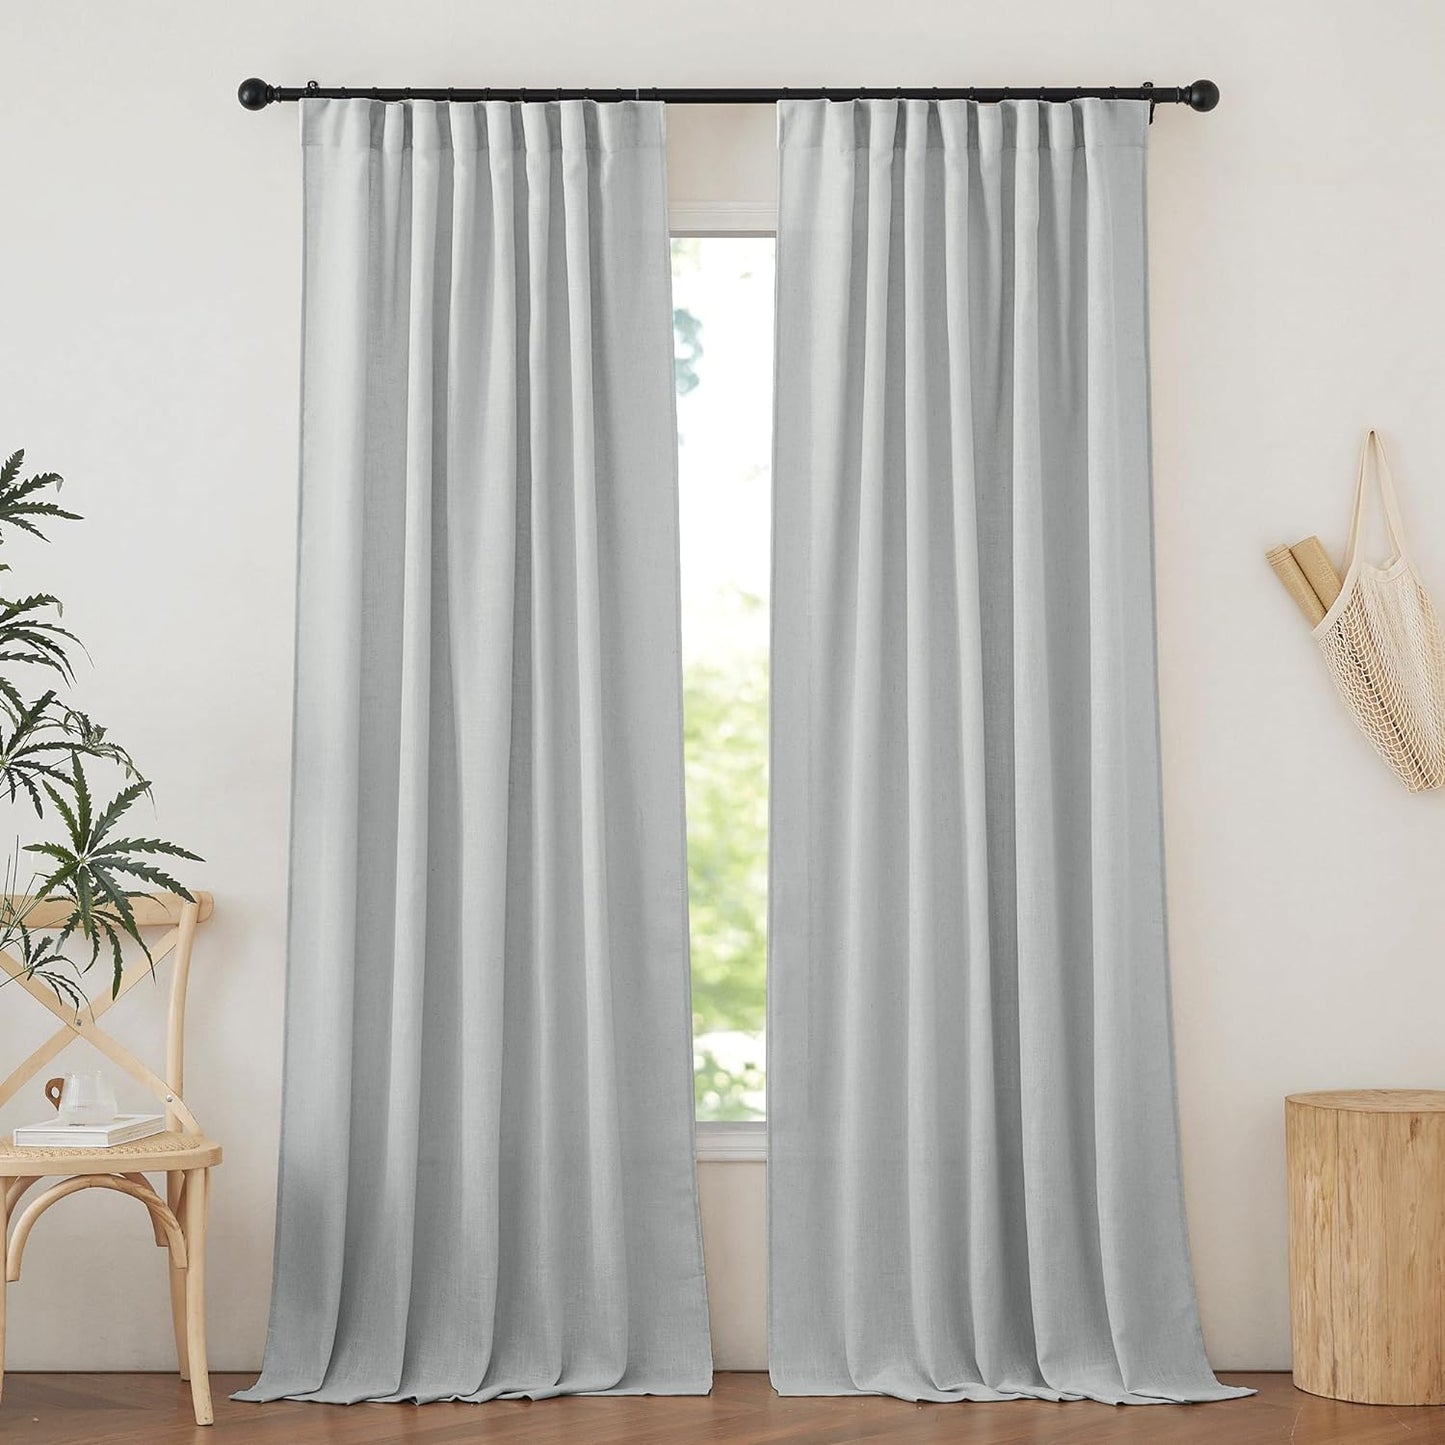 NICETOWN Linen Textured Curtain for Bedroom/Living Room Thermal Insulated Back Tab Linen Look Curtain Drapes Soft Rich Material Light Reducing Drape Panels for Window, 2 Panels, 52 X 84 Inch, Linen  NICETOWN Light Grey W52 X L84 